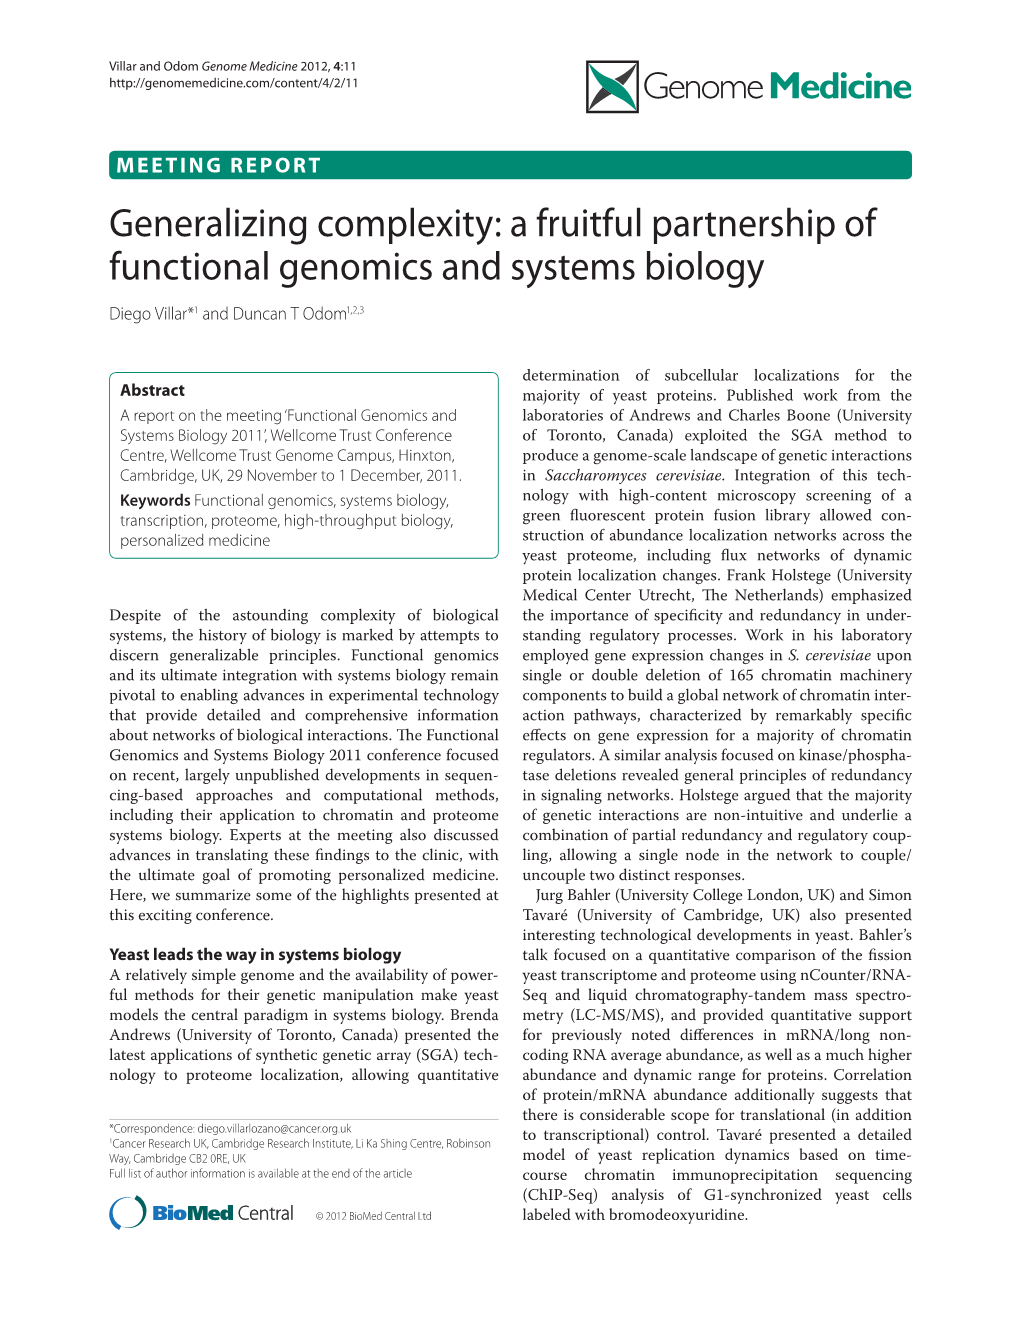 A Fruitful Partnership of Functional Genomics and Systems Biology Diego Villar*1 and Duncan T Odom1,2,3